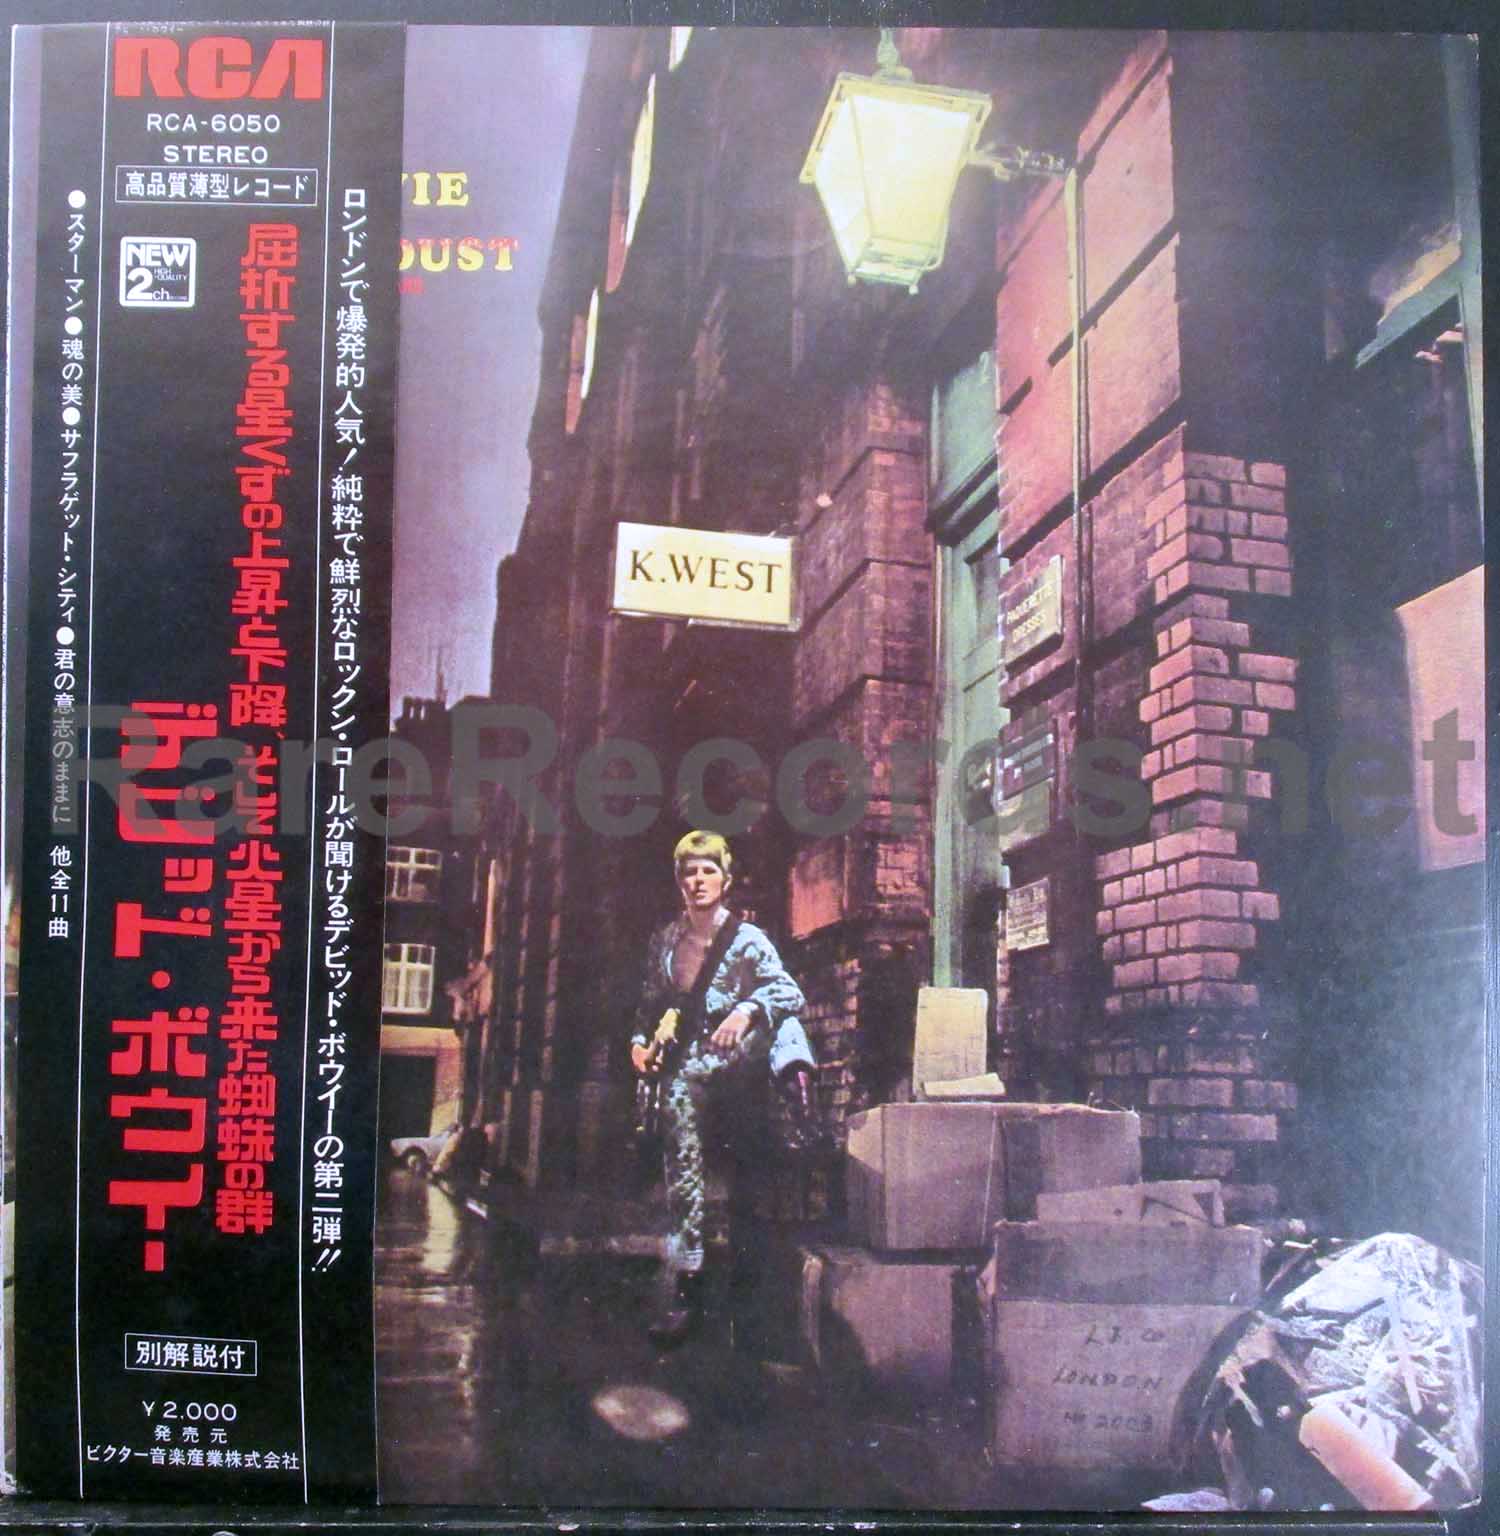 David Bowie - The Rise and Fall of Ziggy Stardust and the Spiders from Mars  1972 Japan LP with black obi